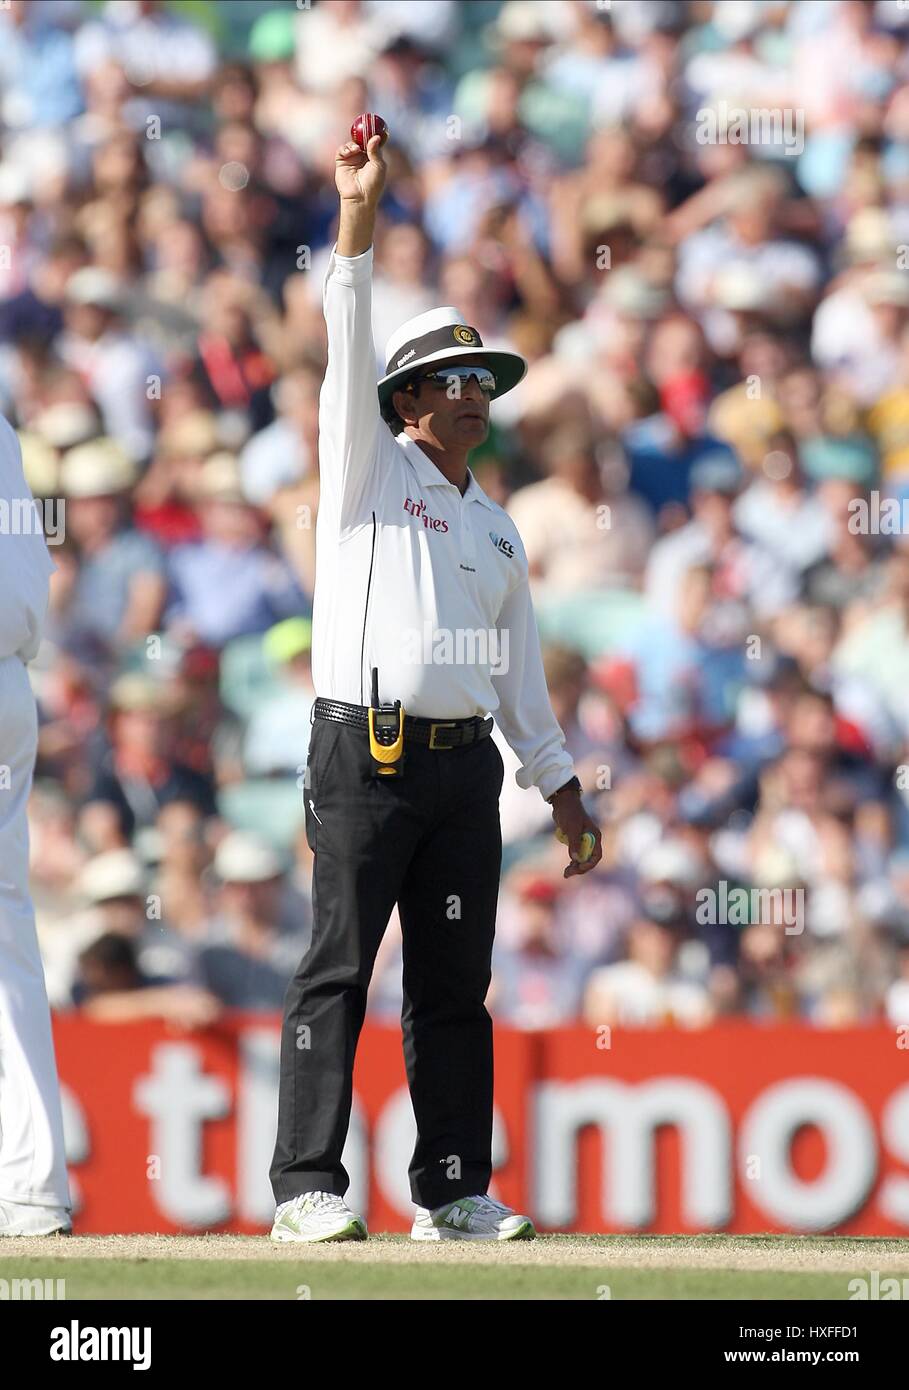 ASAD RAUF ICB TEST UMPIRE THE BRIT OVAL LONDON ENGLAND 23 August 2009 Stock Photo